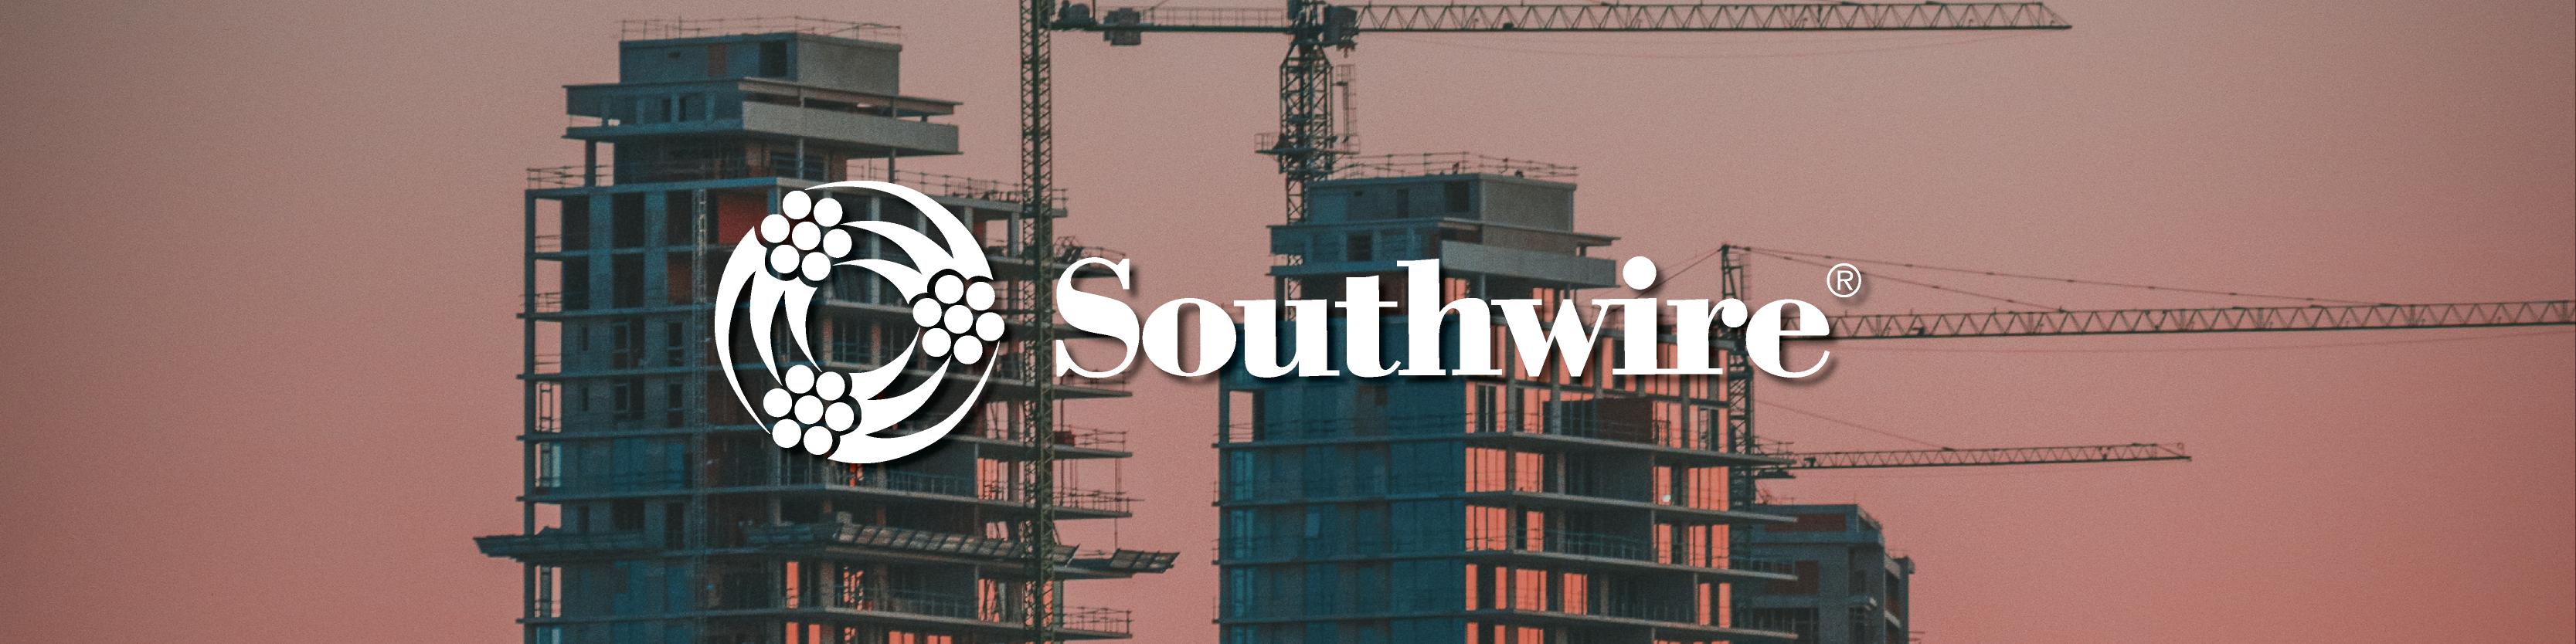 News, Southwire: Celebrating 70 Years